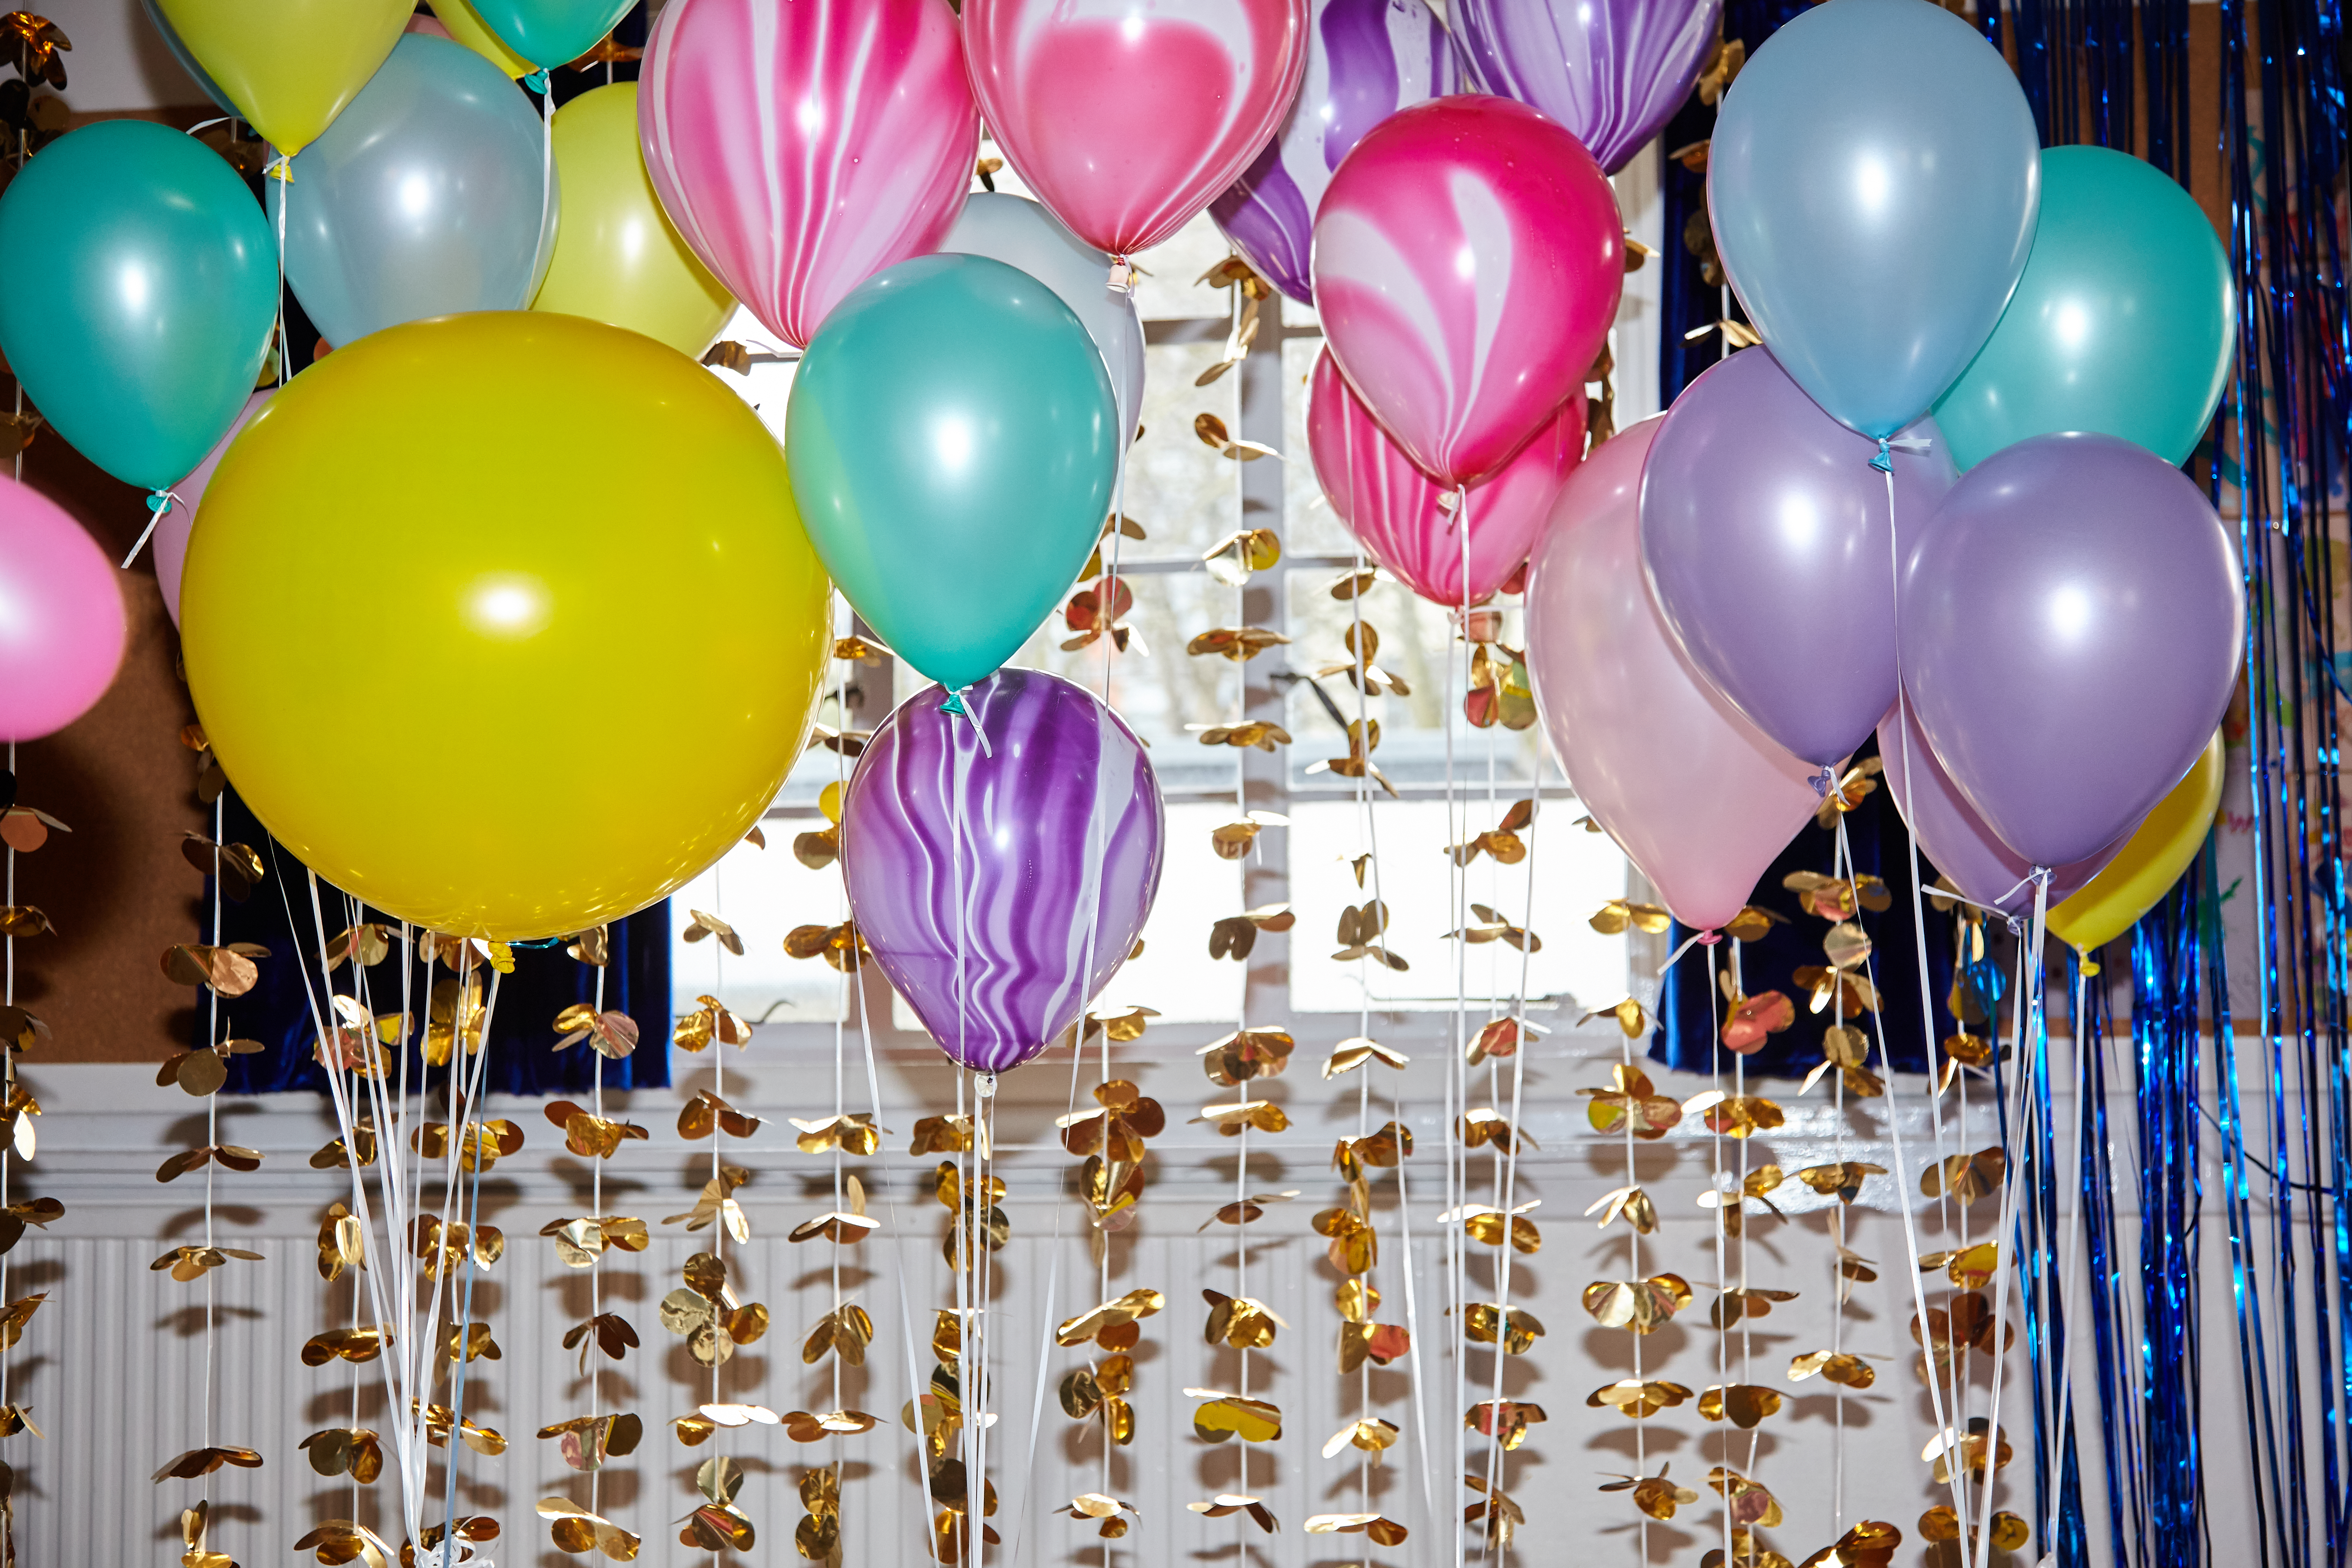 A birthday party | Source: Getty Images